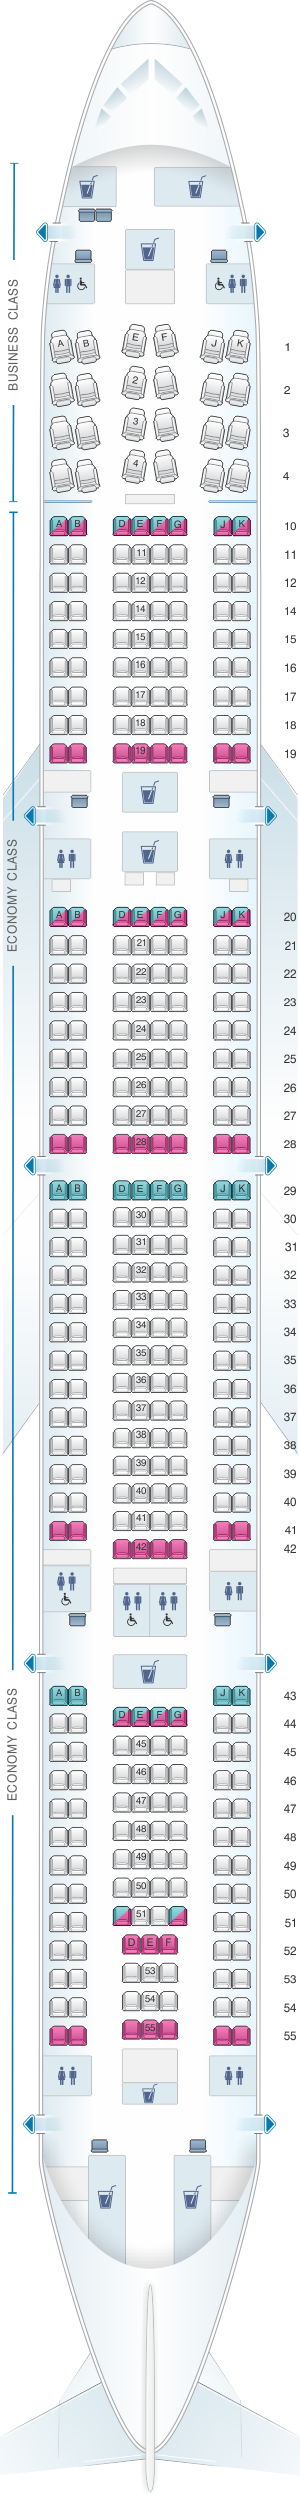 46+ Seating plan for qatar airbus a380 800